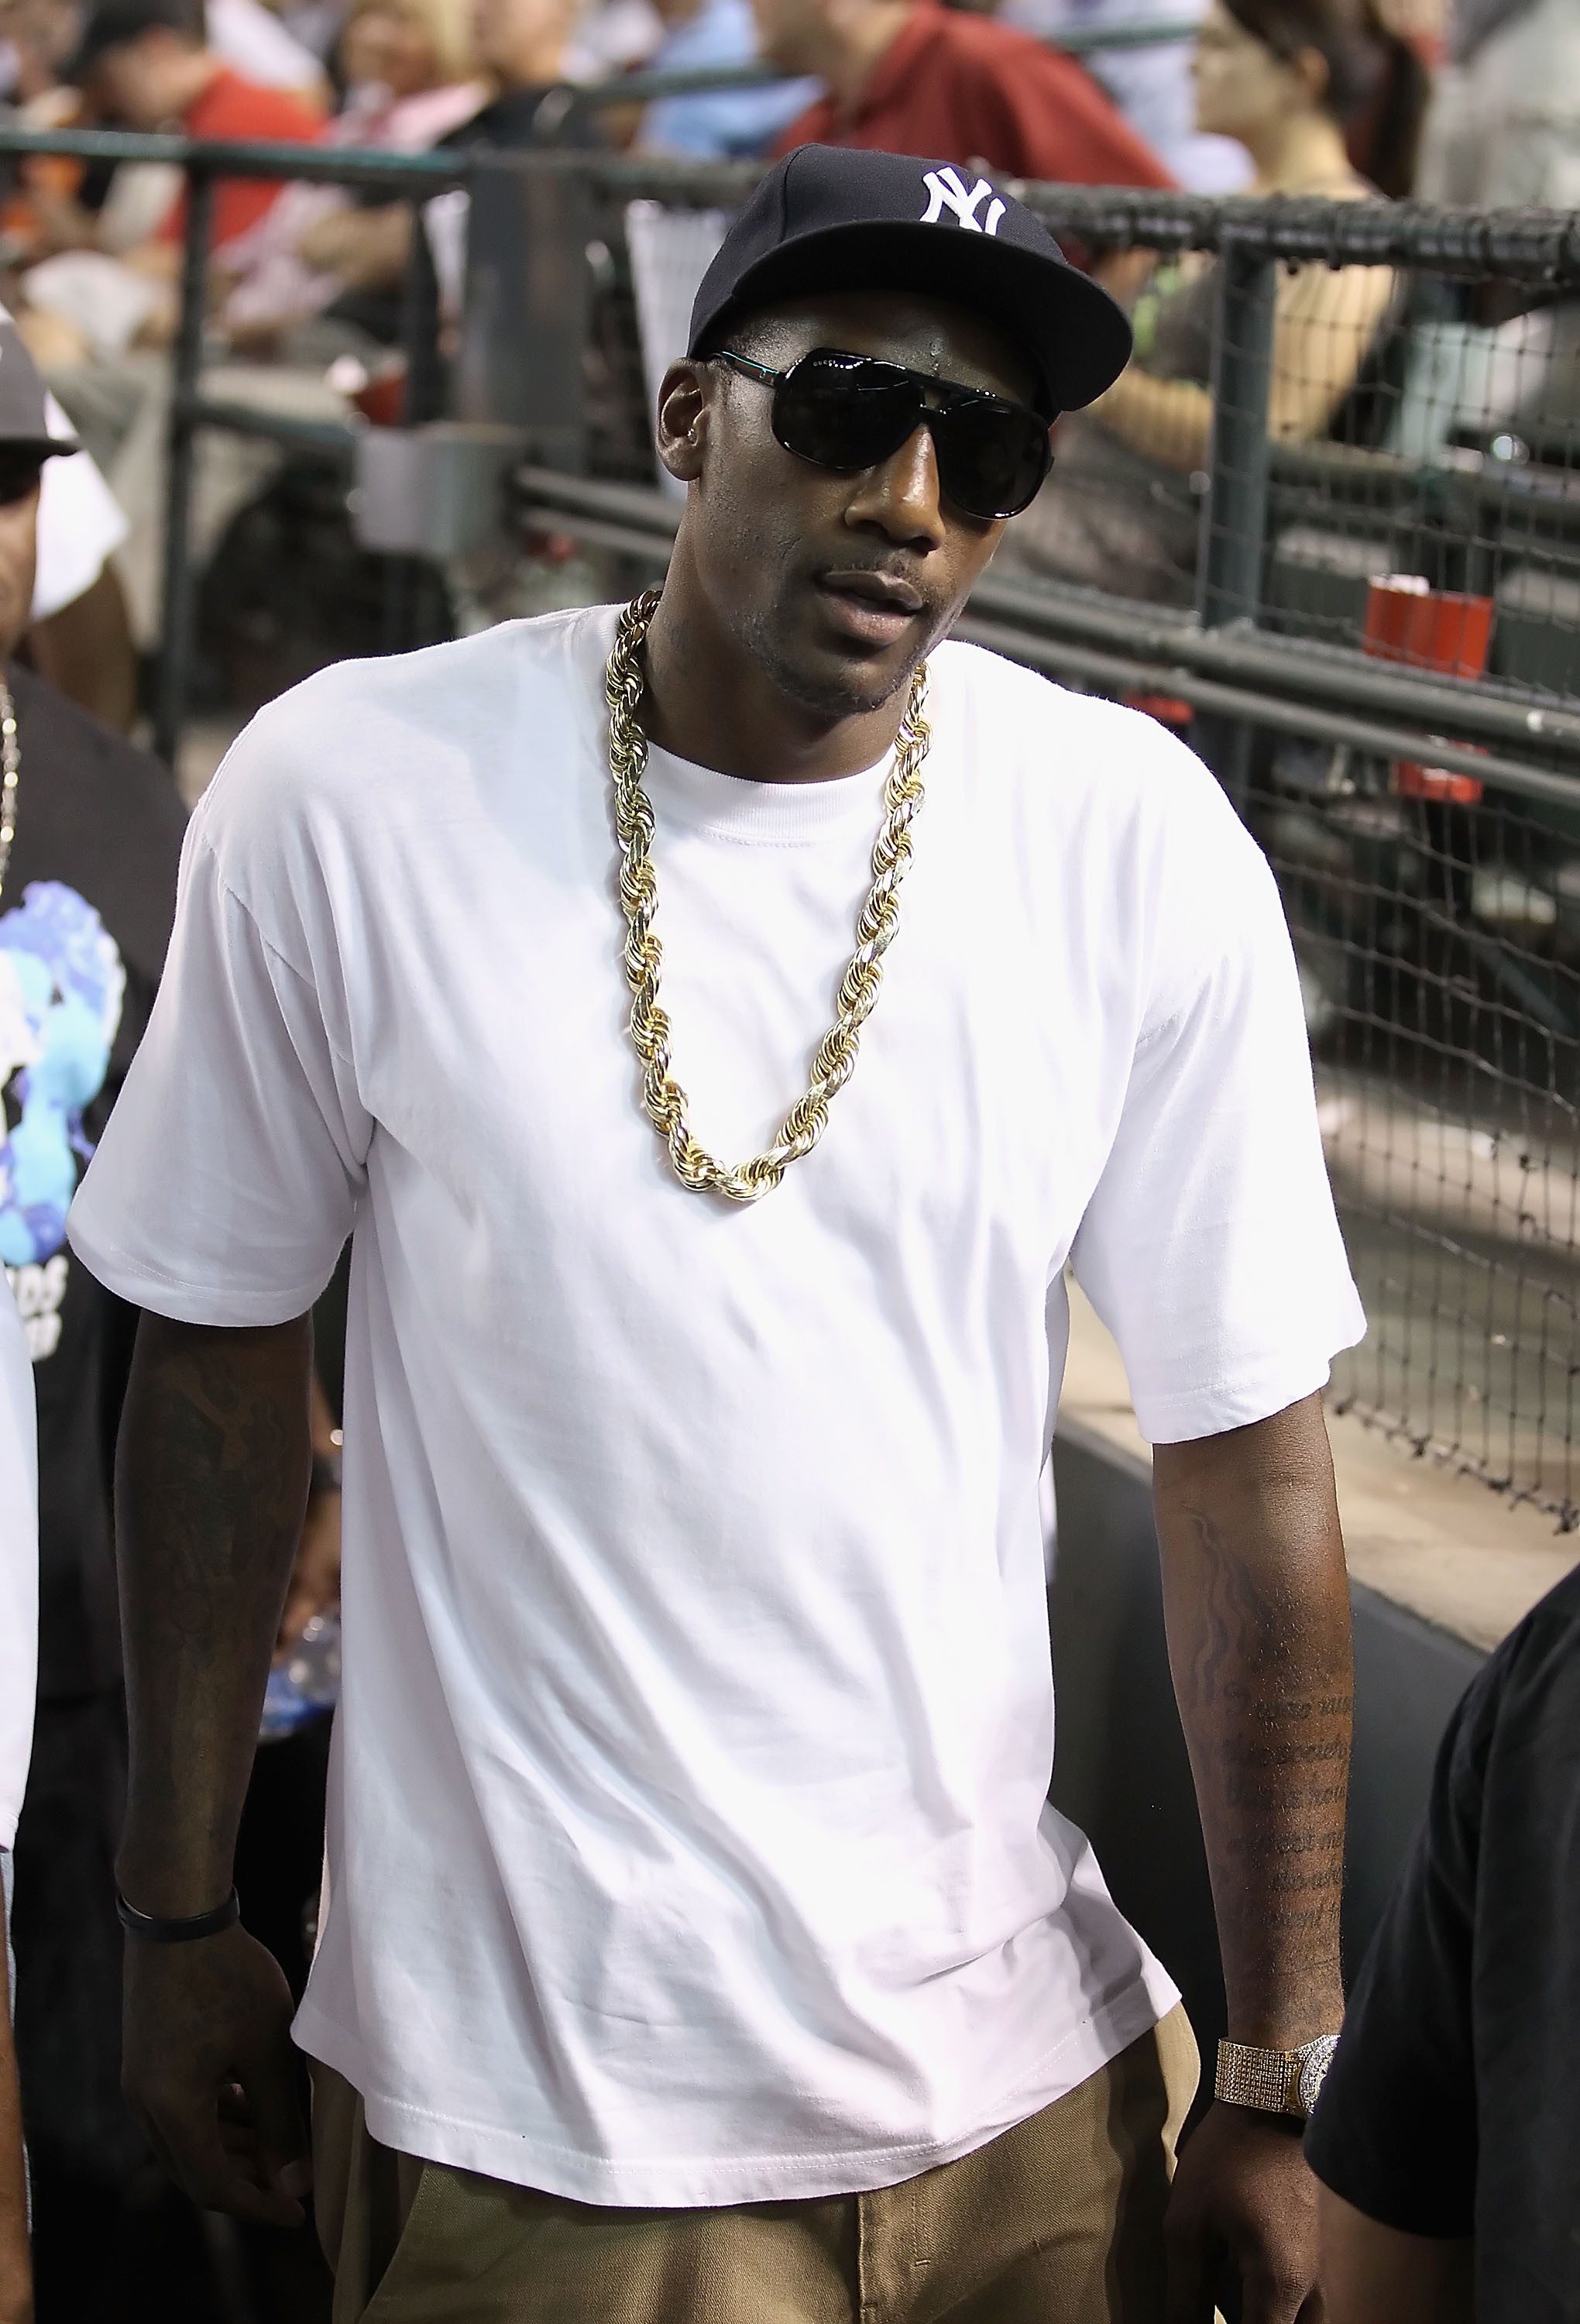 PHOENIX - JUNE 22:  Amar'e Stoudemire of the Phoenix Suns attends the Major League Baseball game between the New York Yankees and the Arizona Diamondbacks at Chase Field on June 22, 2010 in Phoenix, Arizona.  (Photo by Christian Petersen/Getty Images)